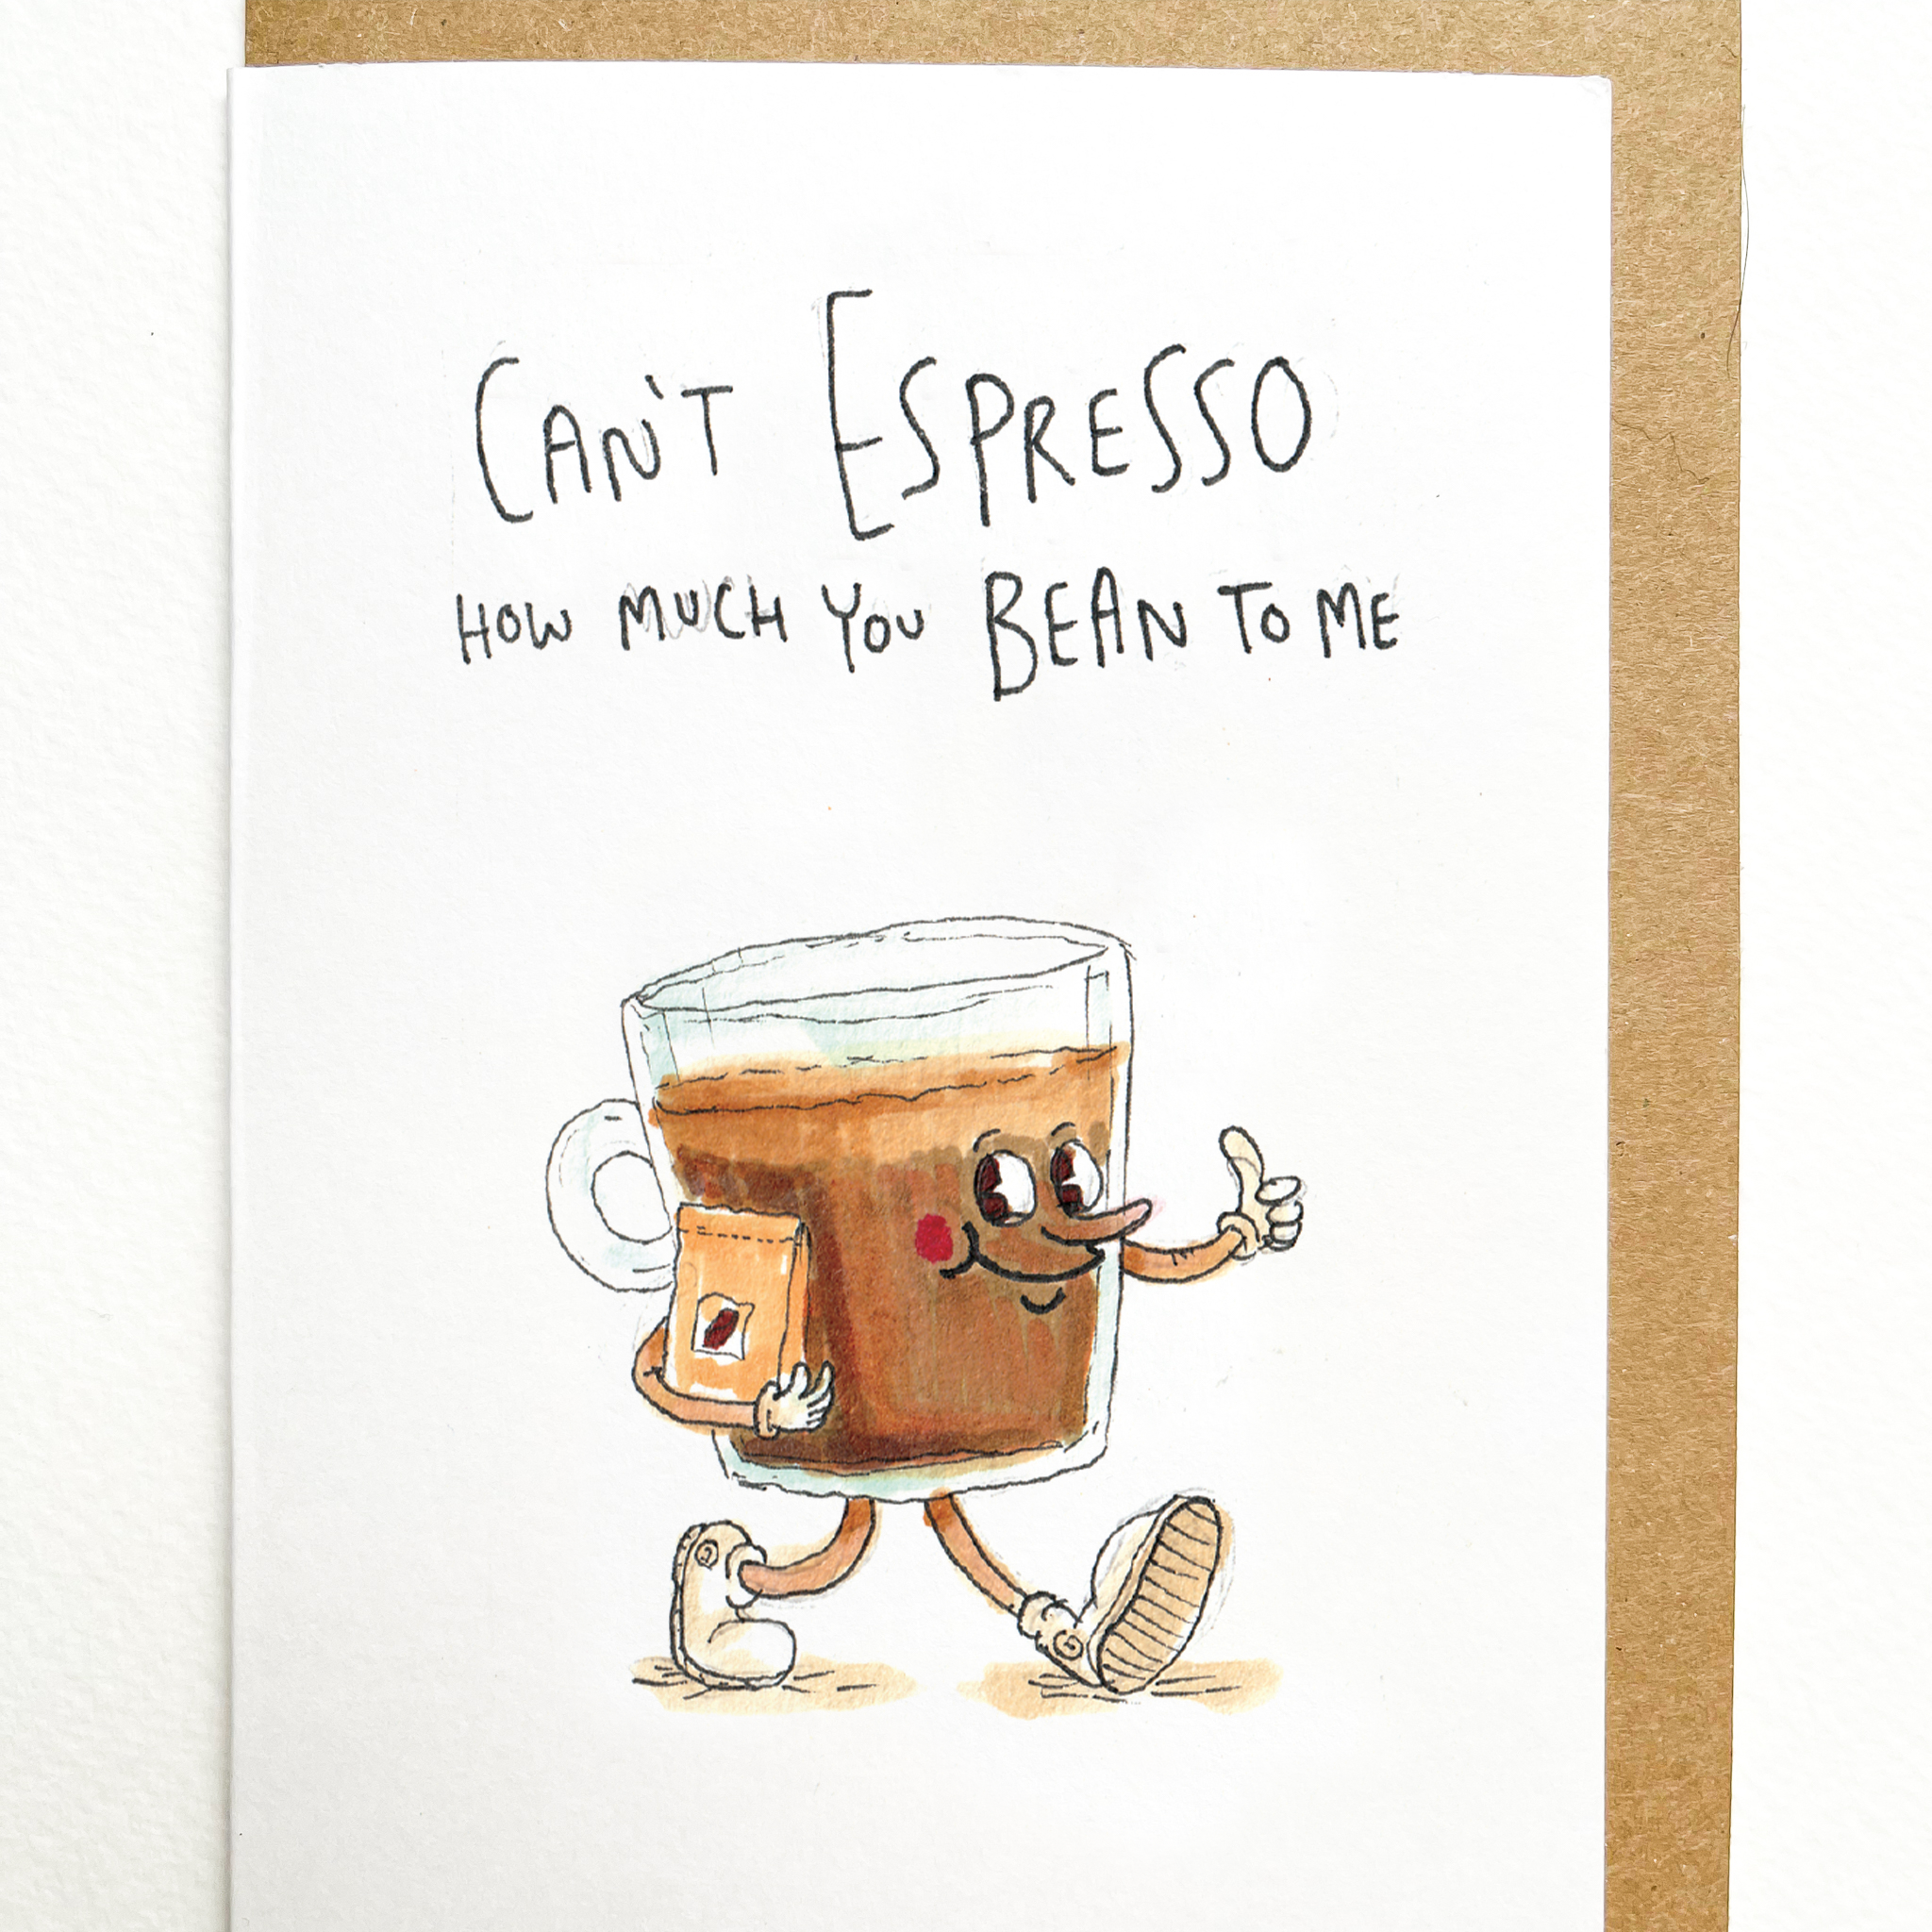 Can't Espresso How Much You Bean To Me